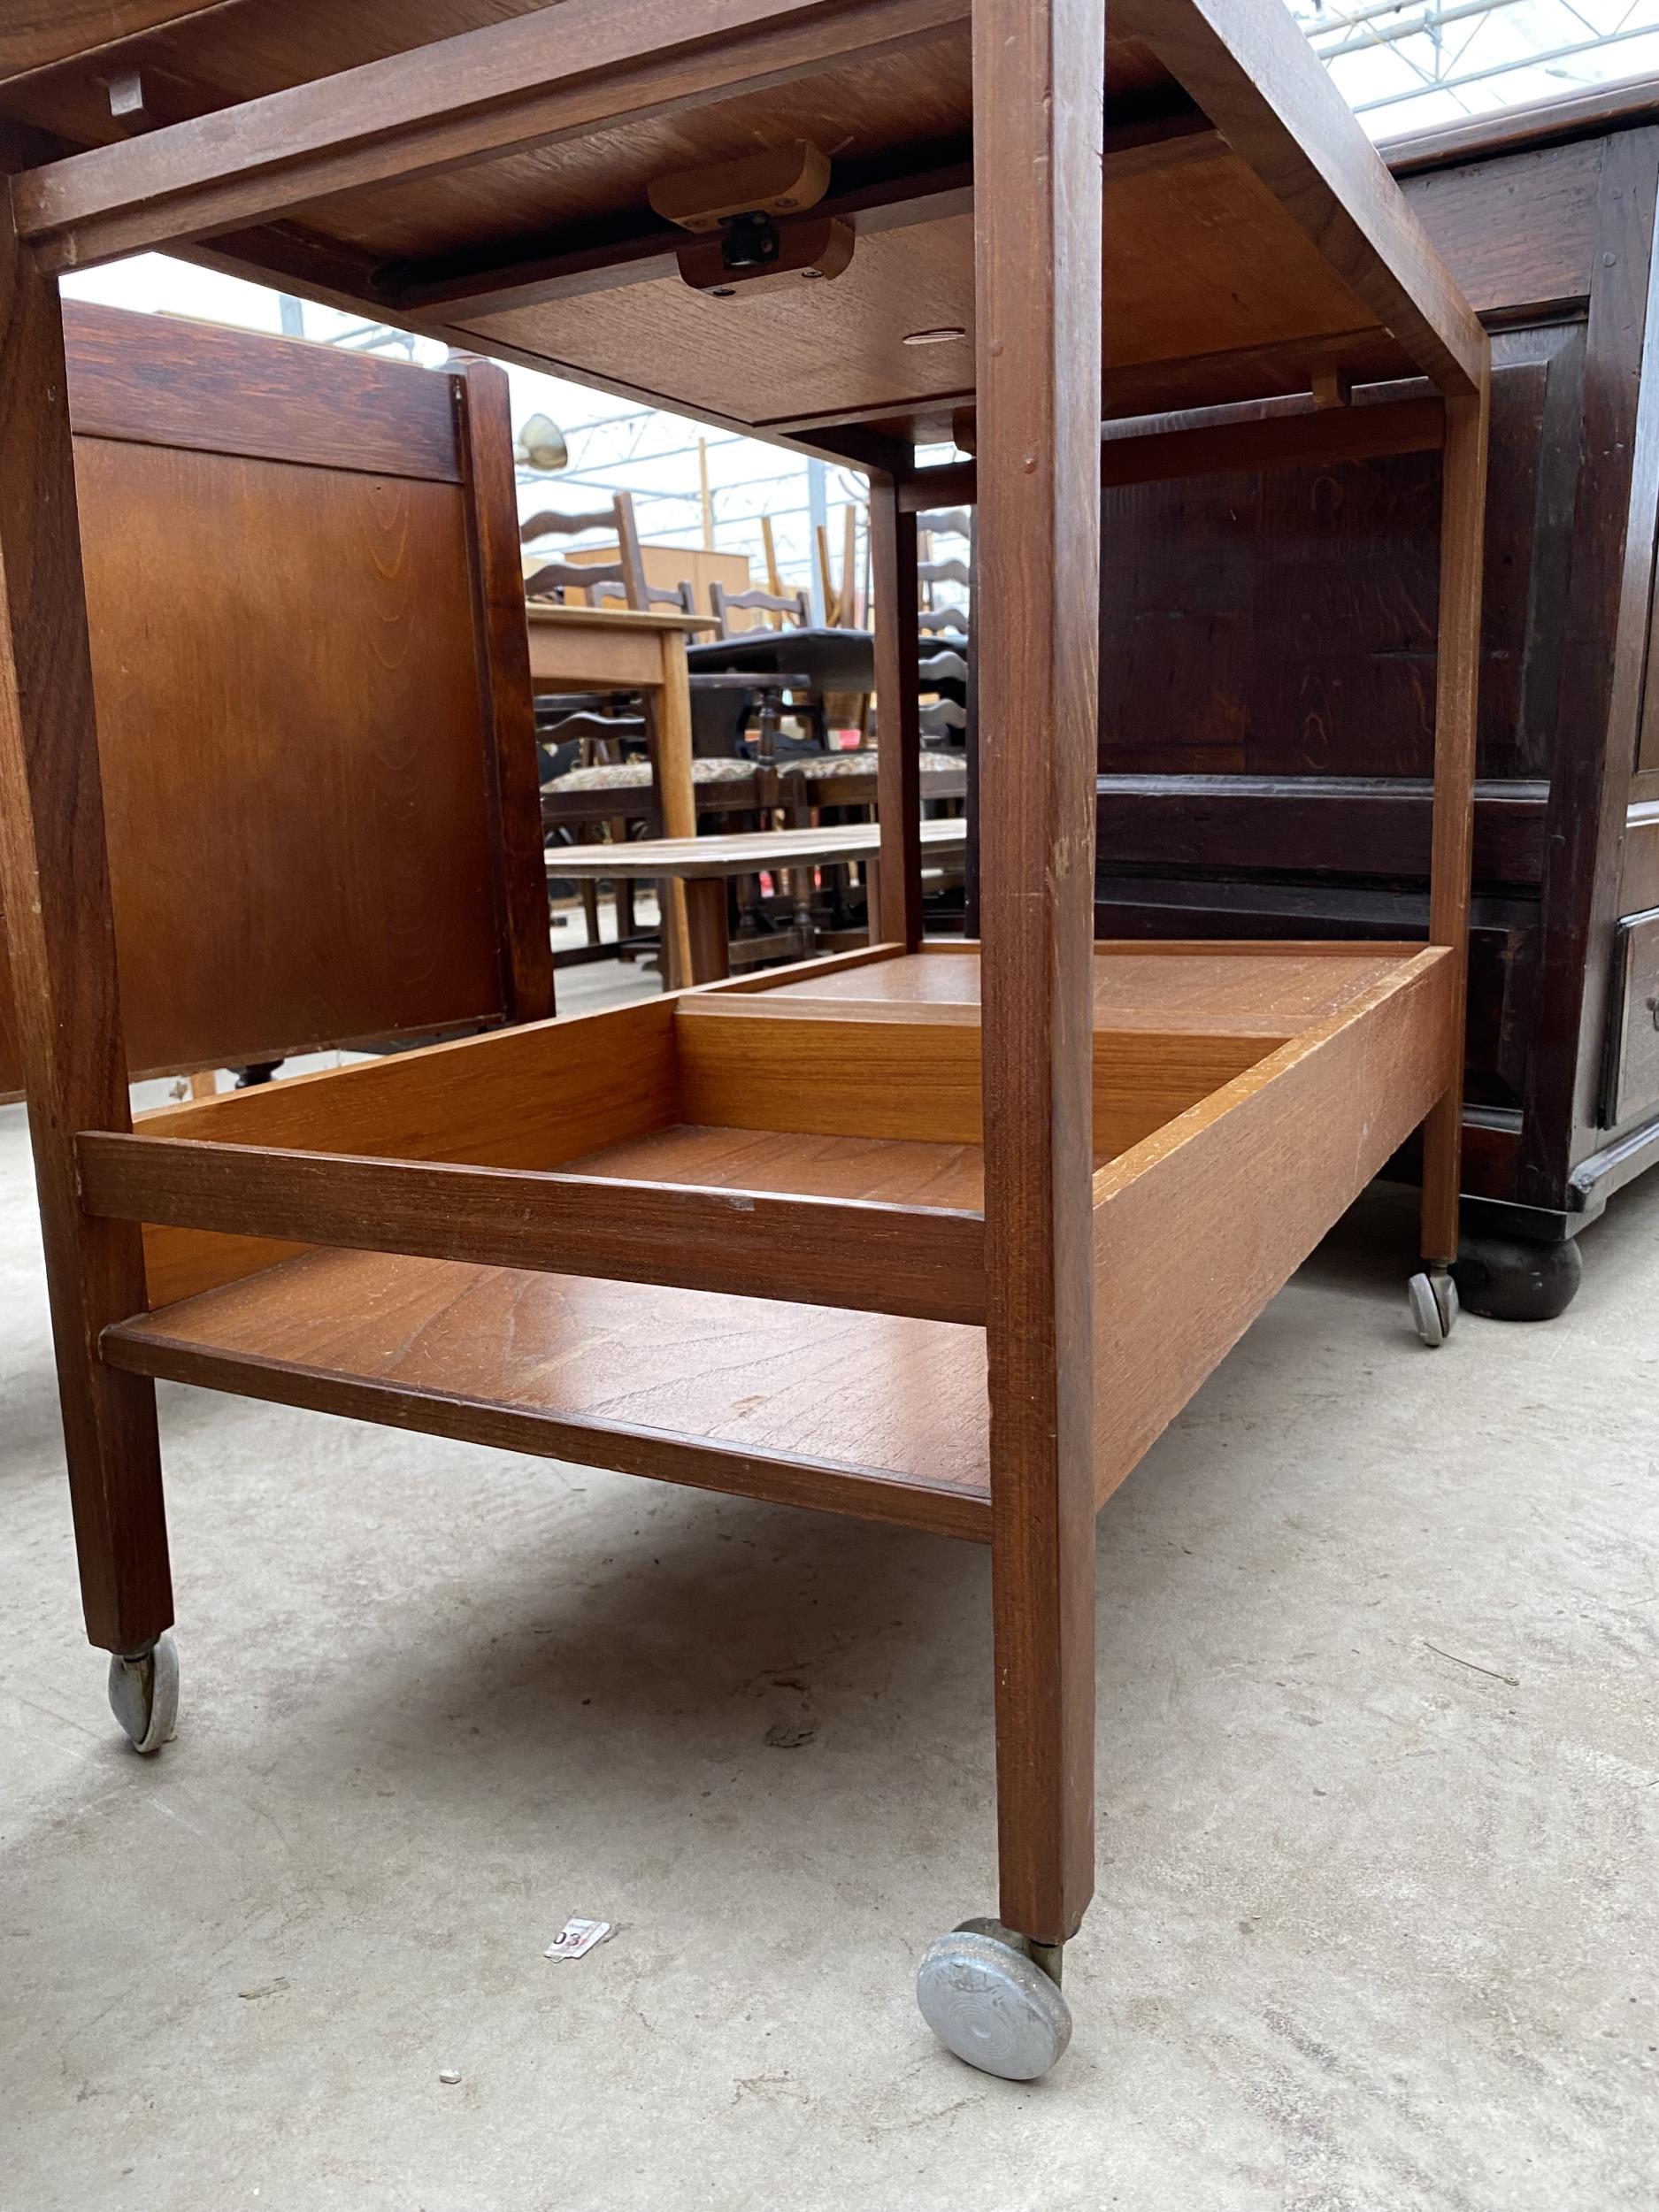 A RETRO TEAK REMPLOY TWO TIER TROLLEY WITH SINGLE DRAWER AND PULL-OUT TOP SECTION, 35X18" - Image 2 of 3